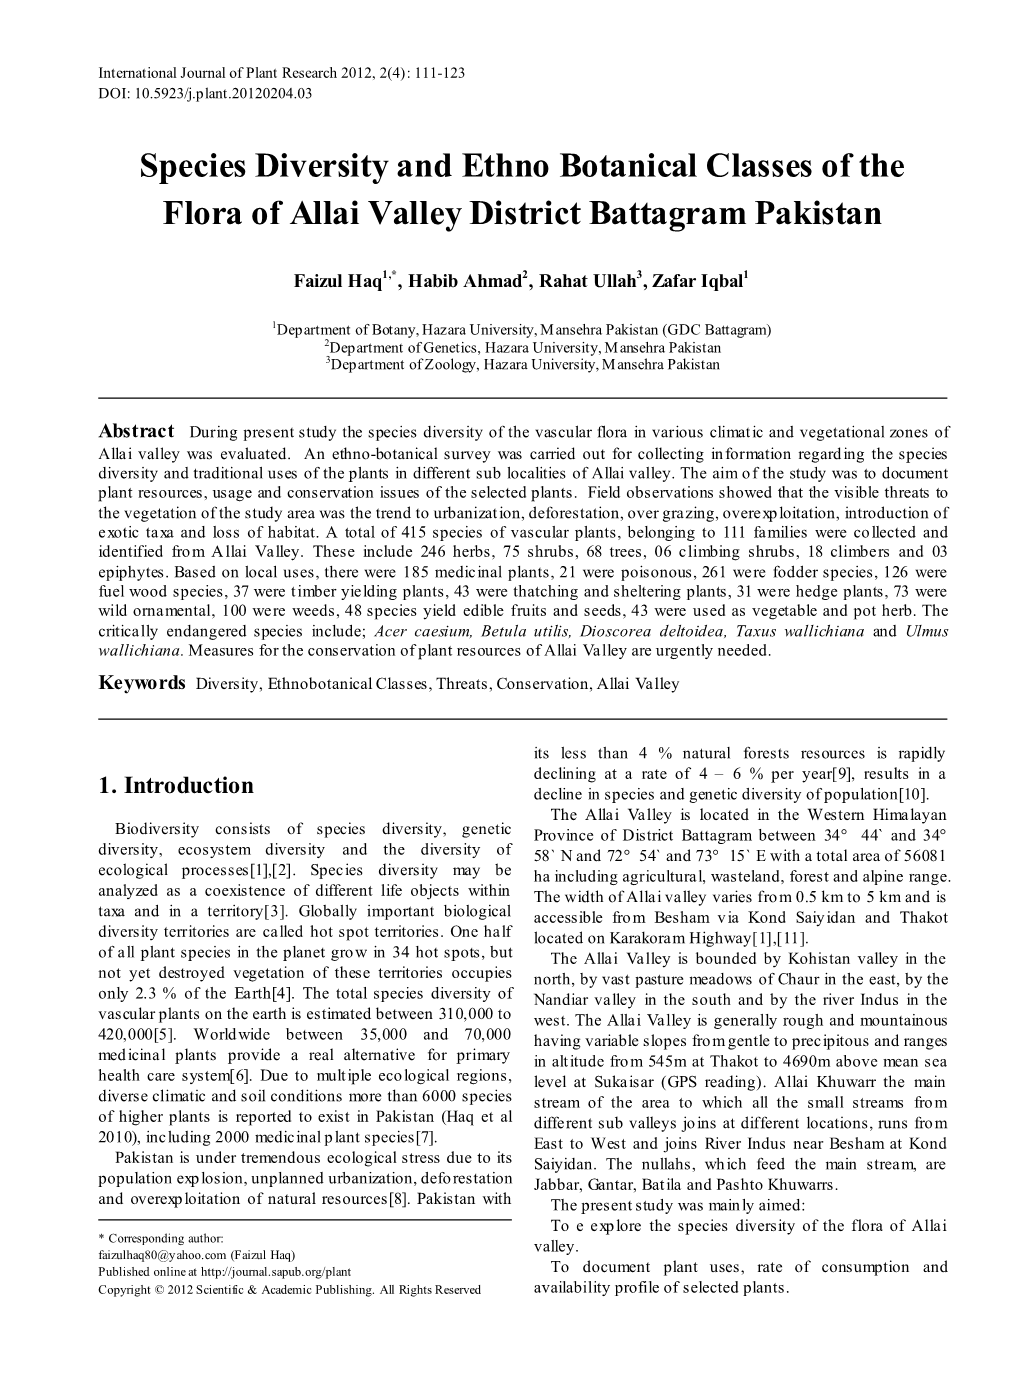 Species Diversity and Ethno Botanical Classes of the Flora of Allai Valley District Battagram Pakistan